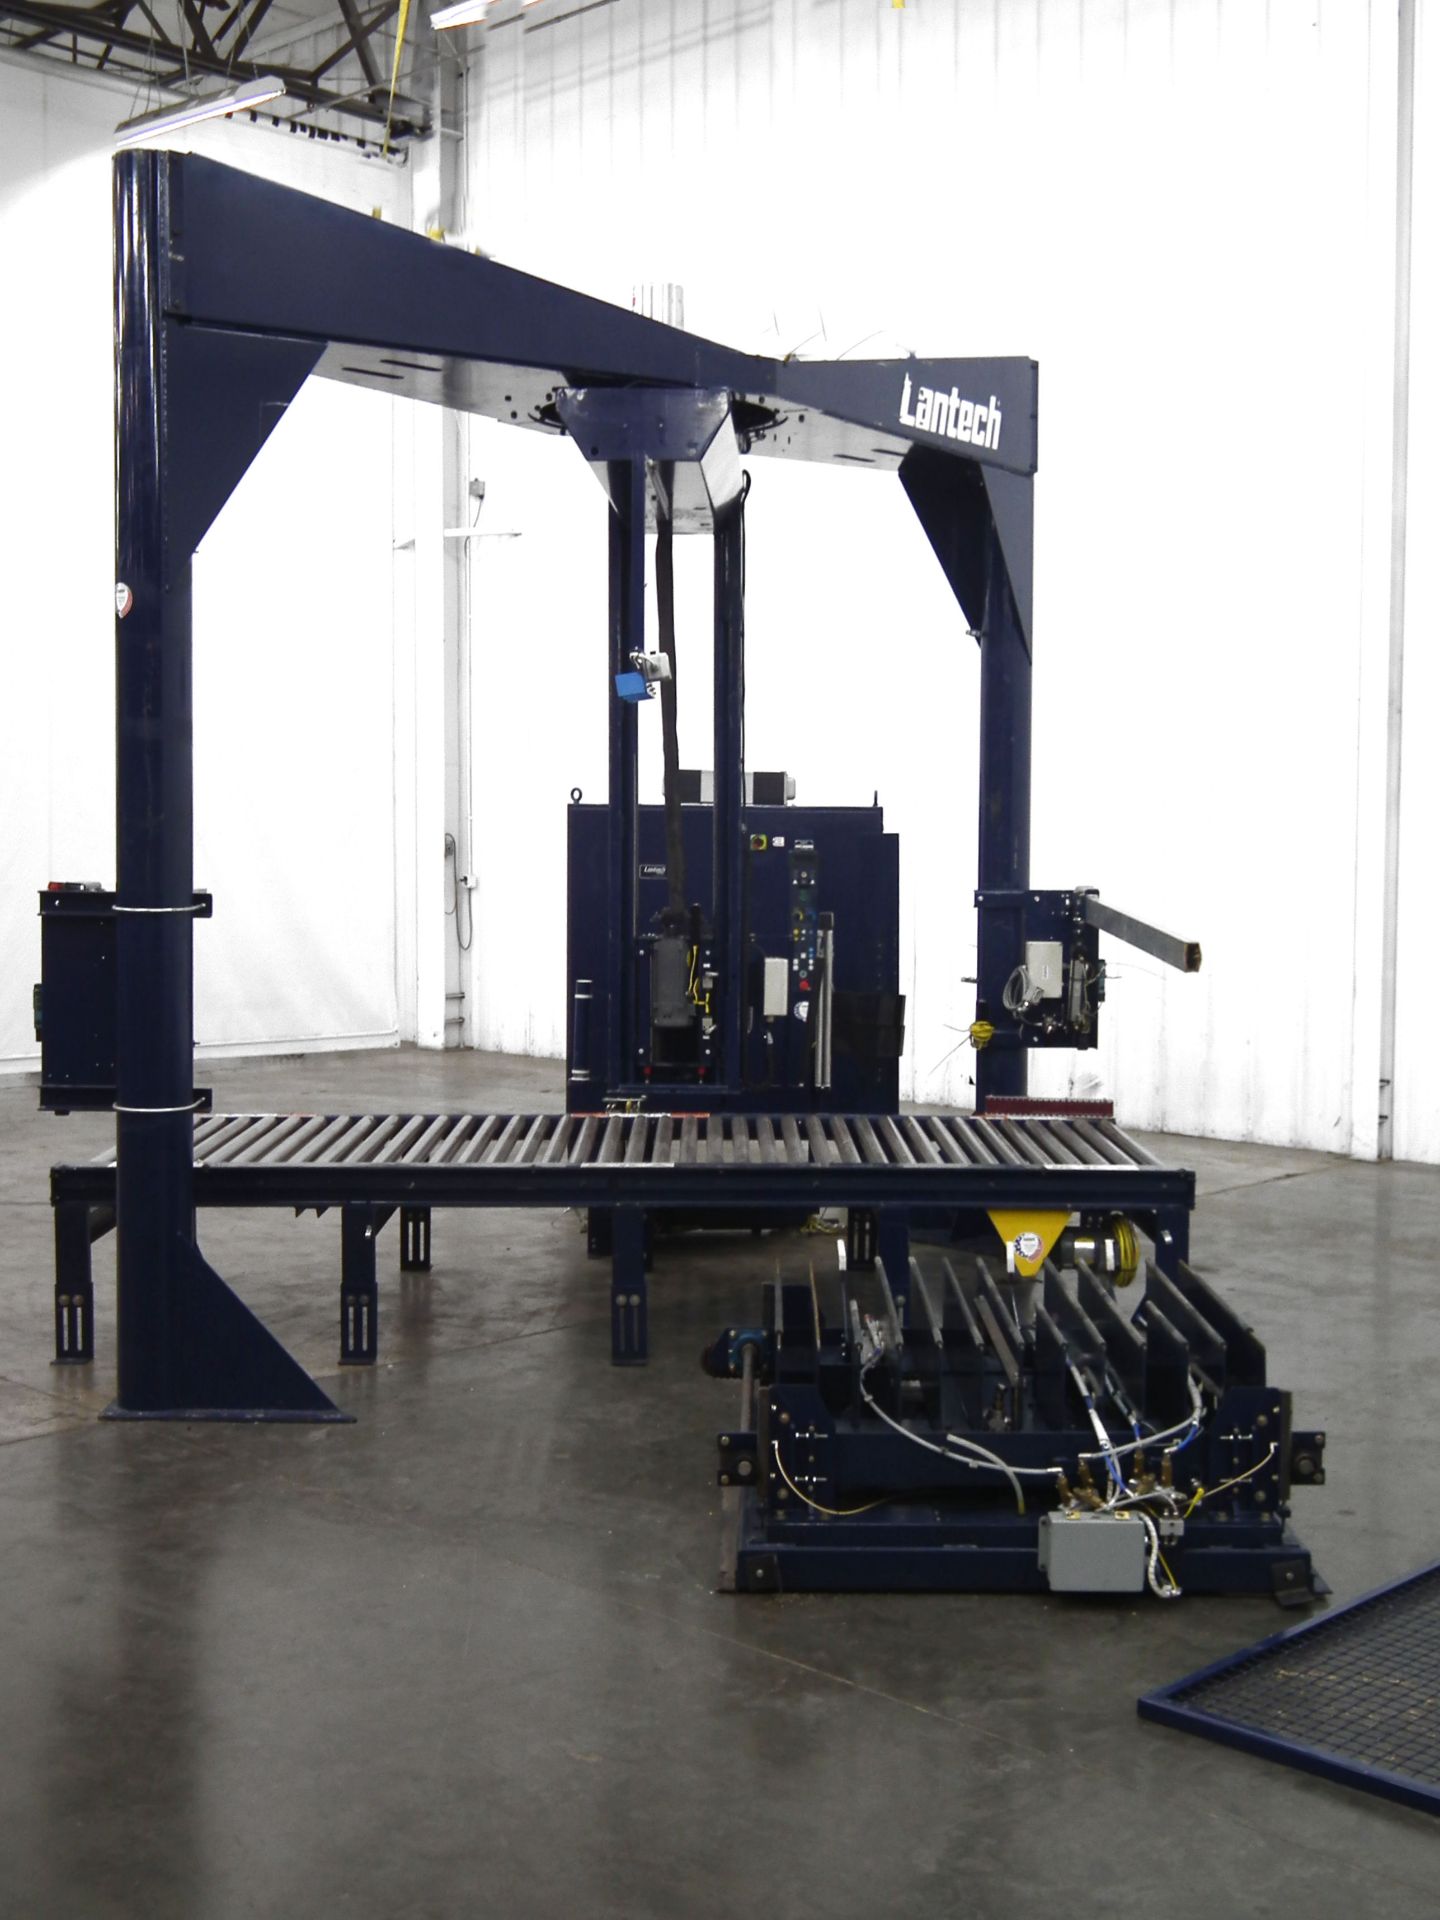 Lantech S3500 Automatic Straddle Stretch Wrapper B3443 - Image 4 of 12